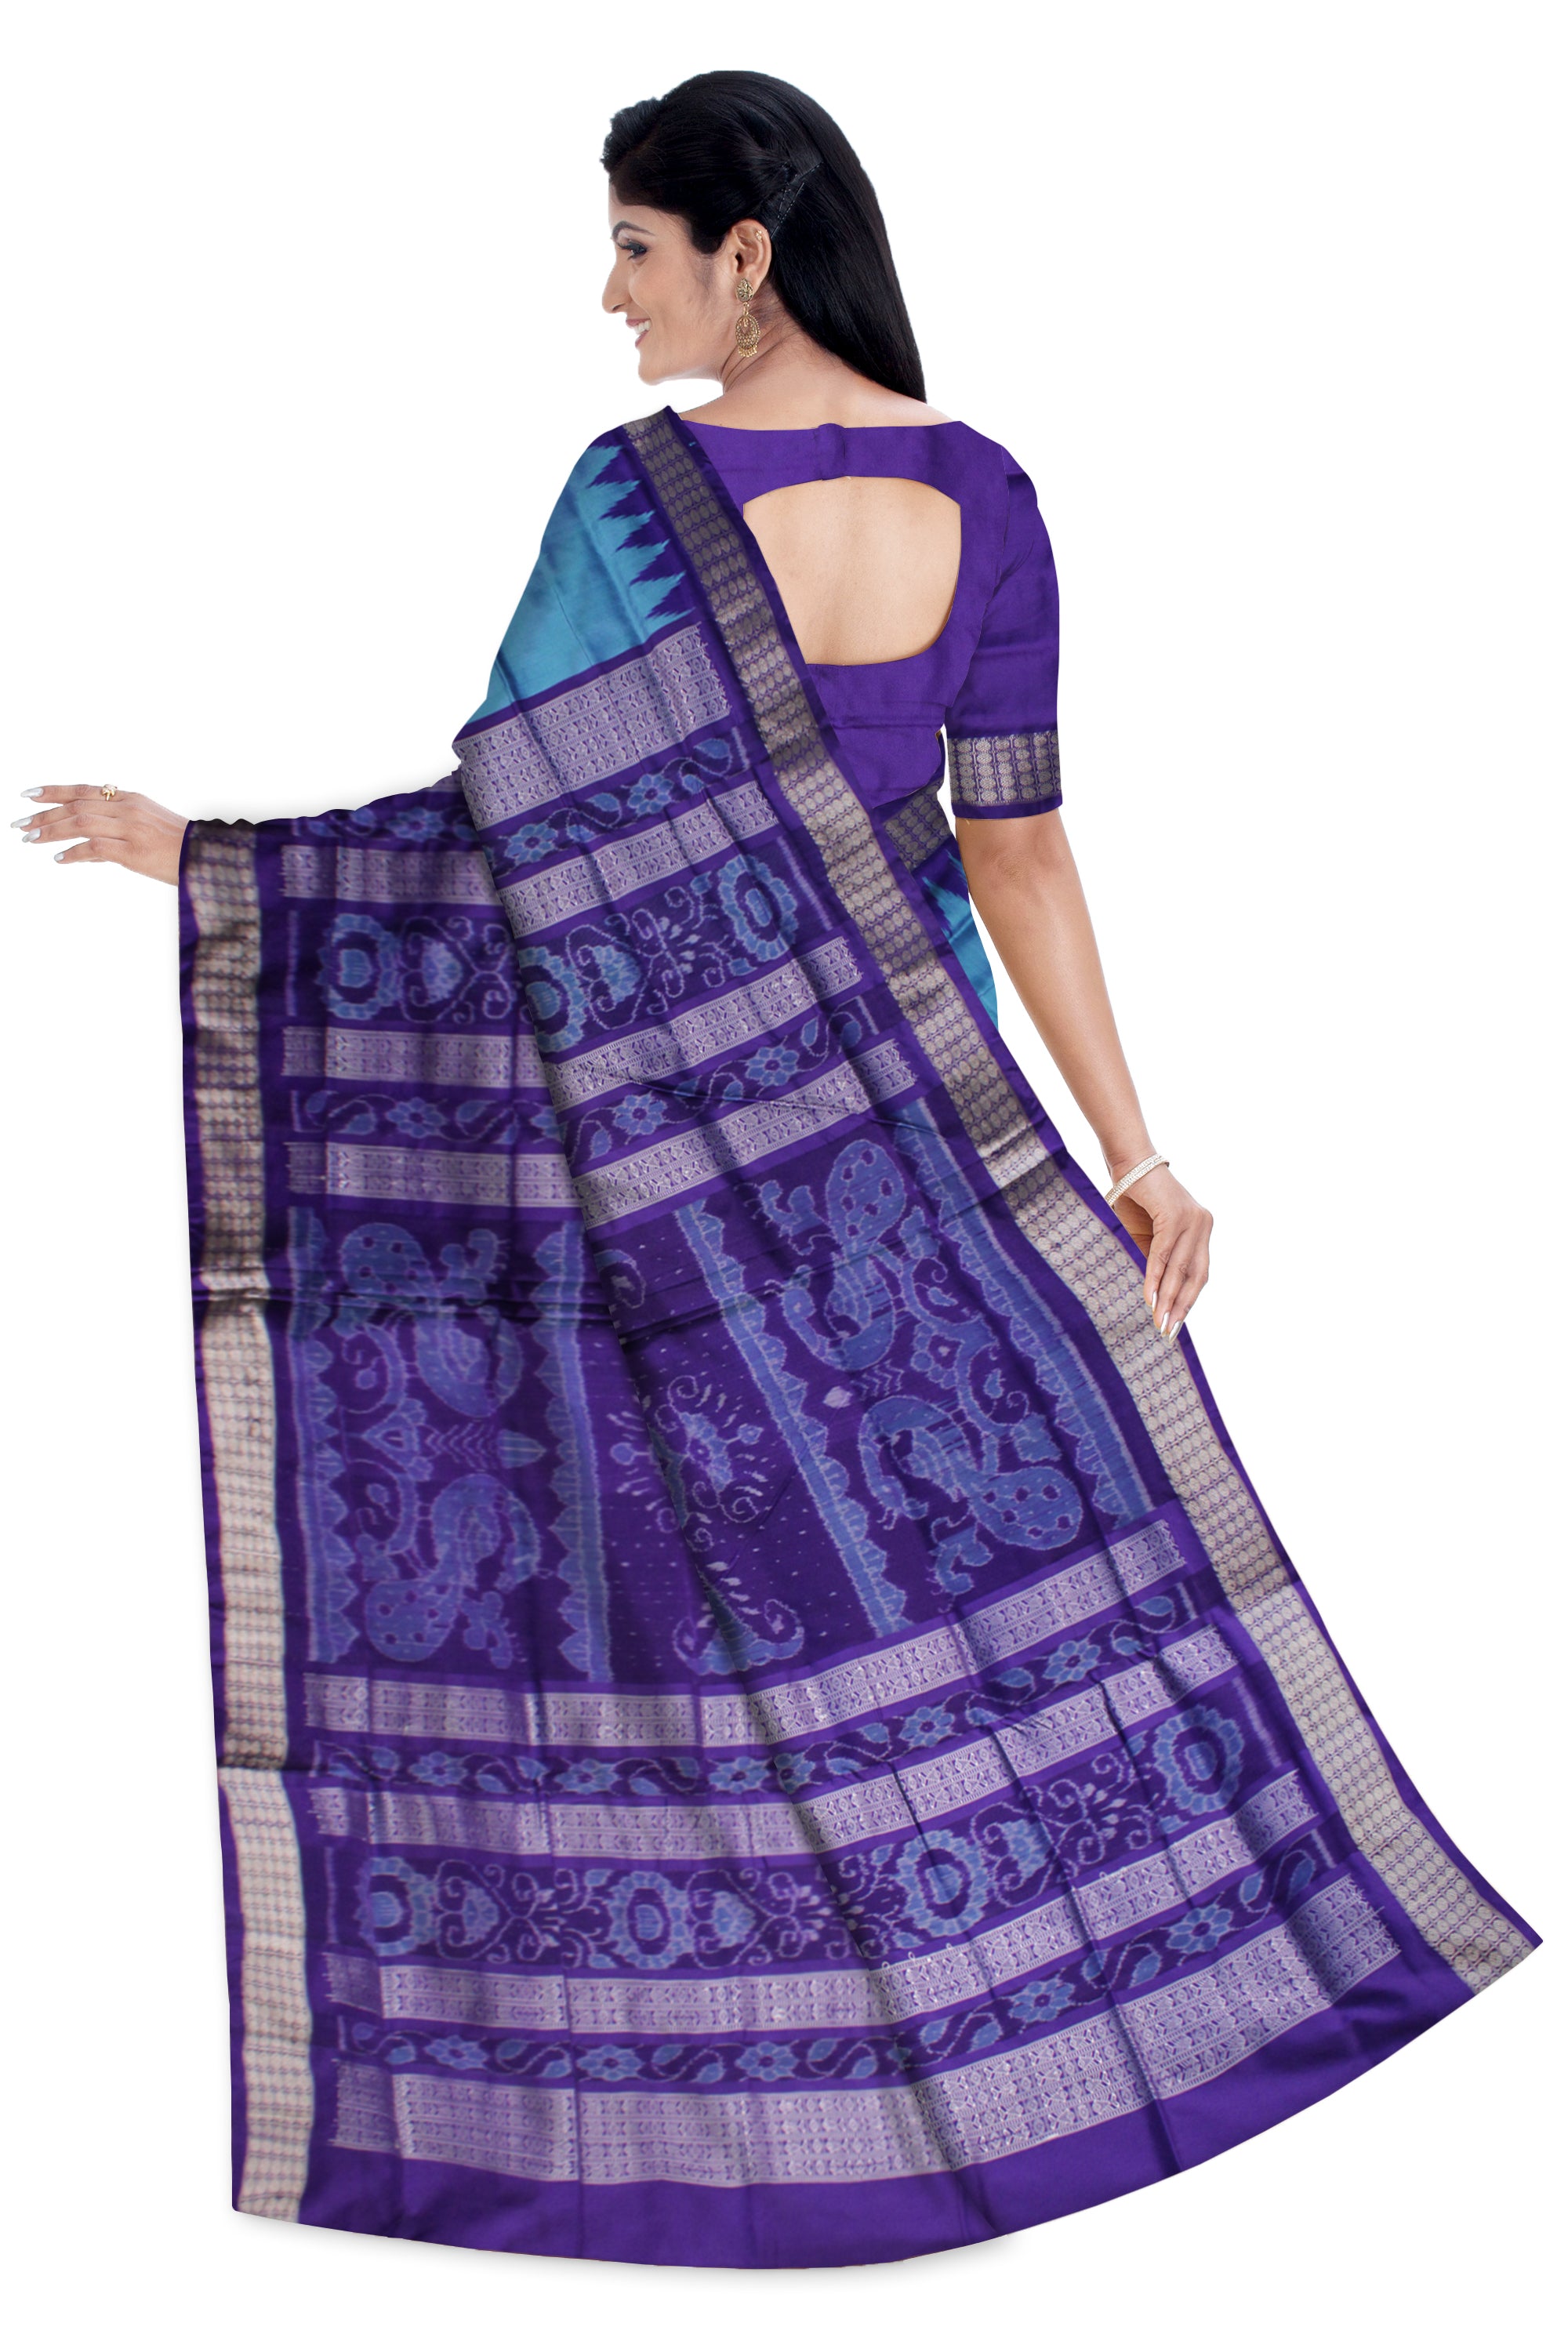 COPPER SULPHATE AND PURPLE COLOR SMALL BOOTY PATTERN PLAIN PATA SAREE,WITH BLOUSE PIECE. - Koshali Arts & Crafts Enterprise